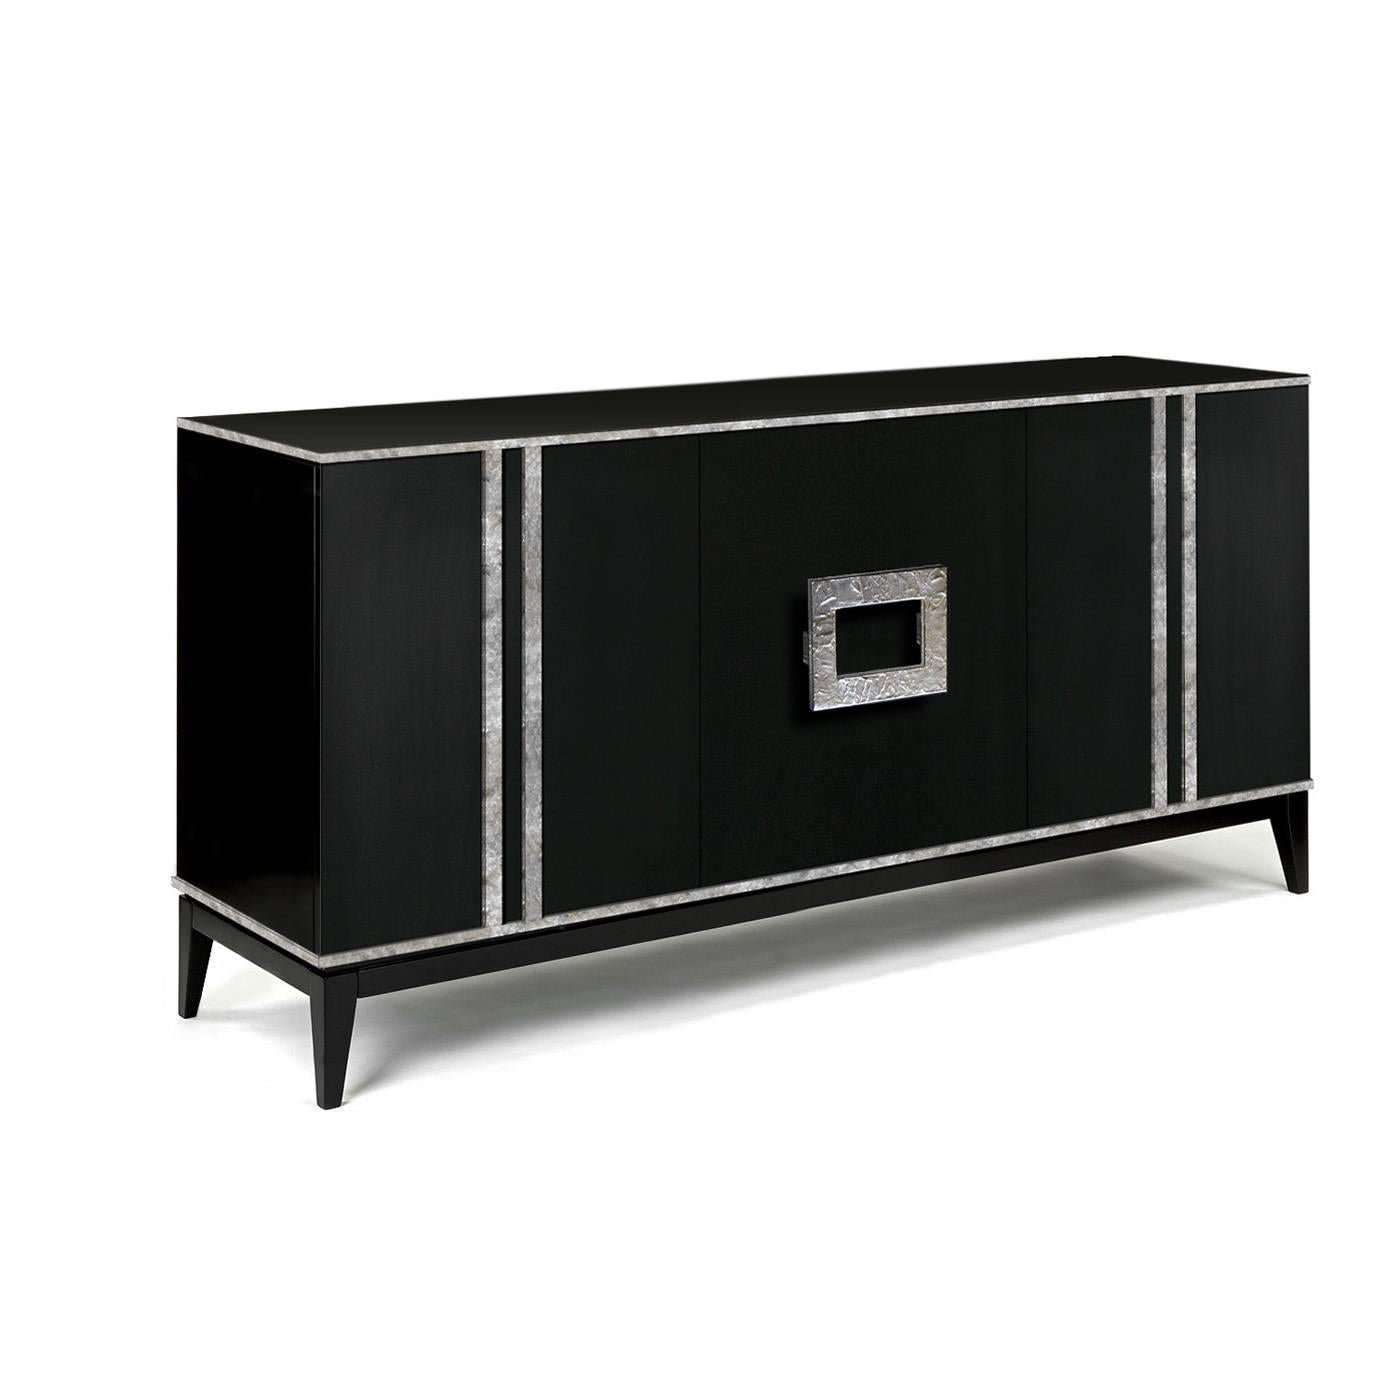 This three-door sideboard is beautifully crafted by the finest Italian artisans. The addition of a metal handle with the bright and intense effect of the hand-applied crinkled leaf offers a subtly glamorous appeal.